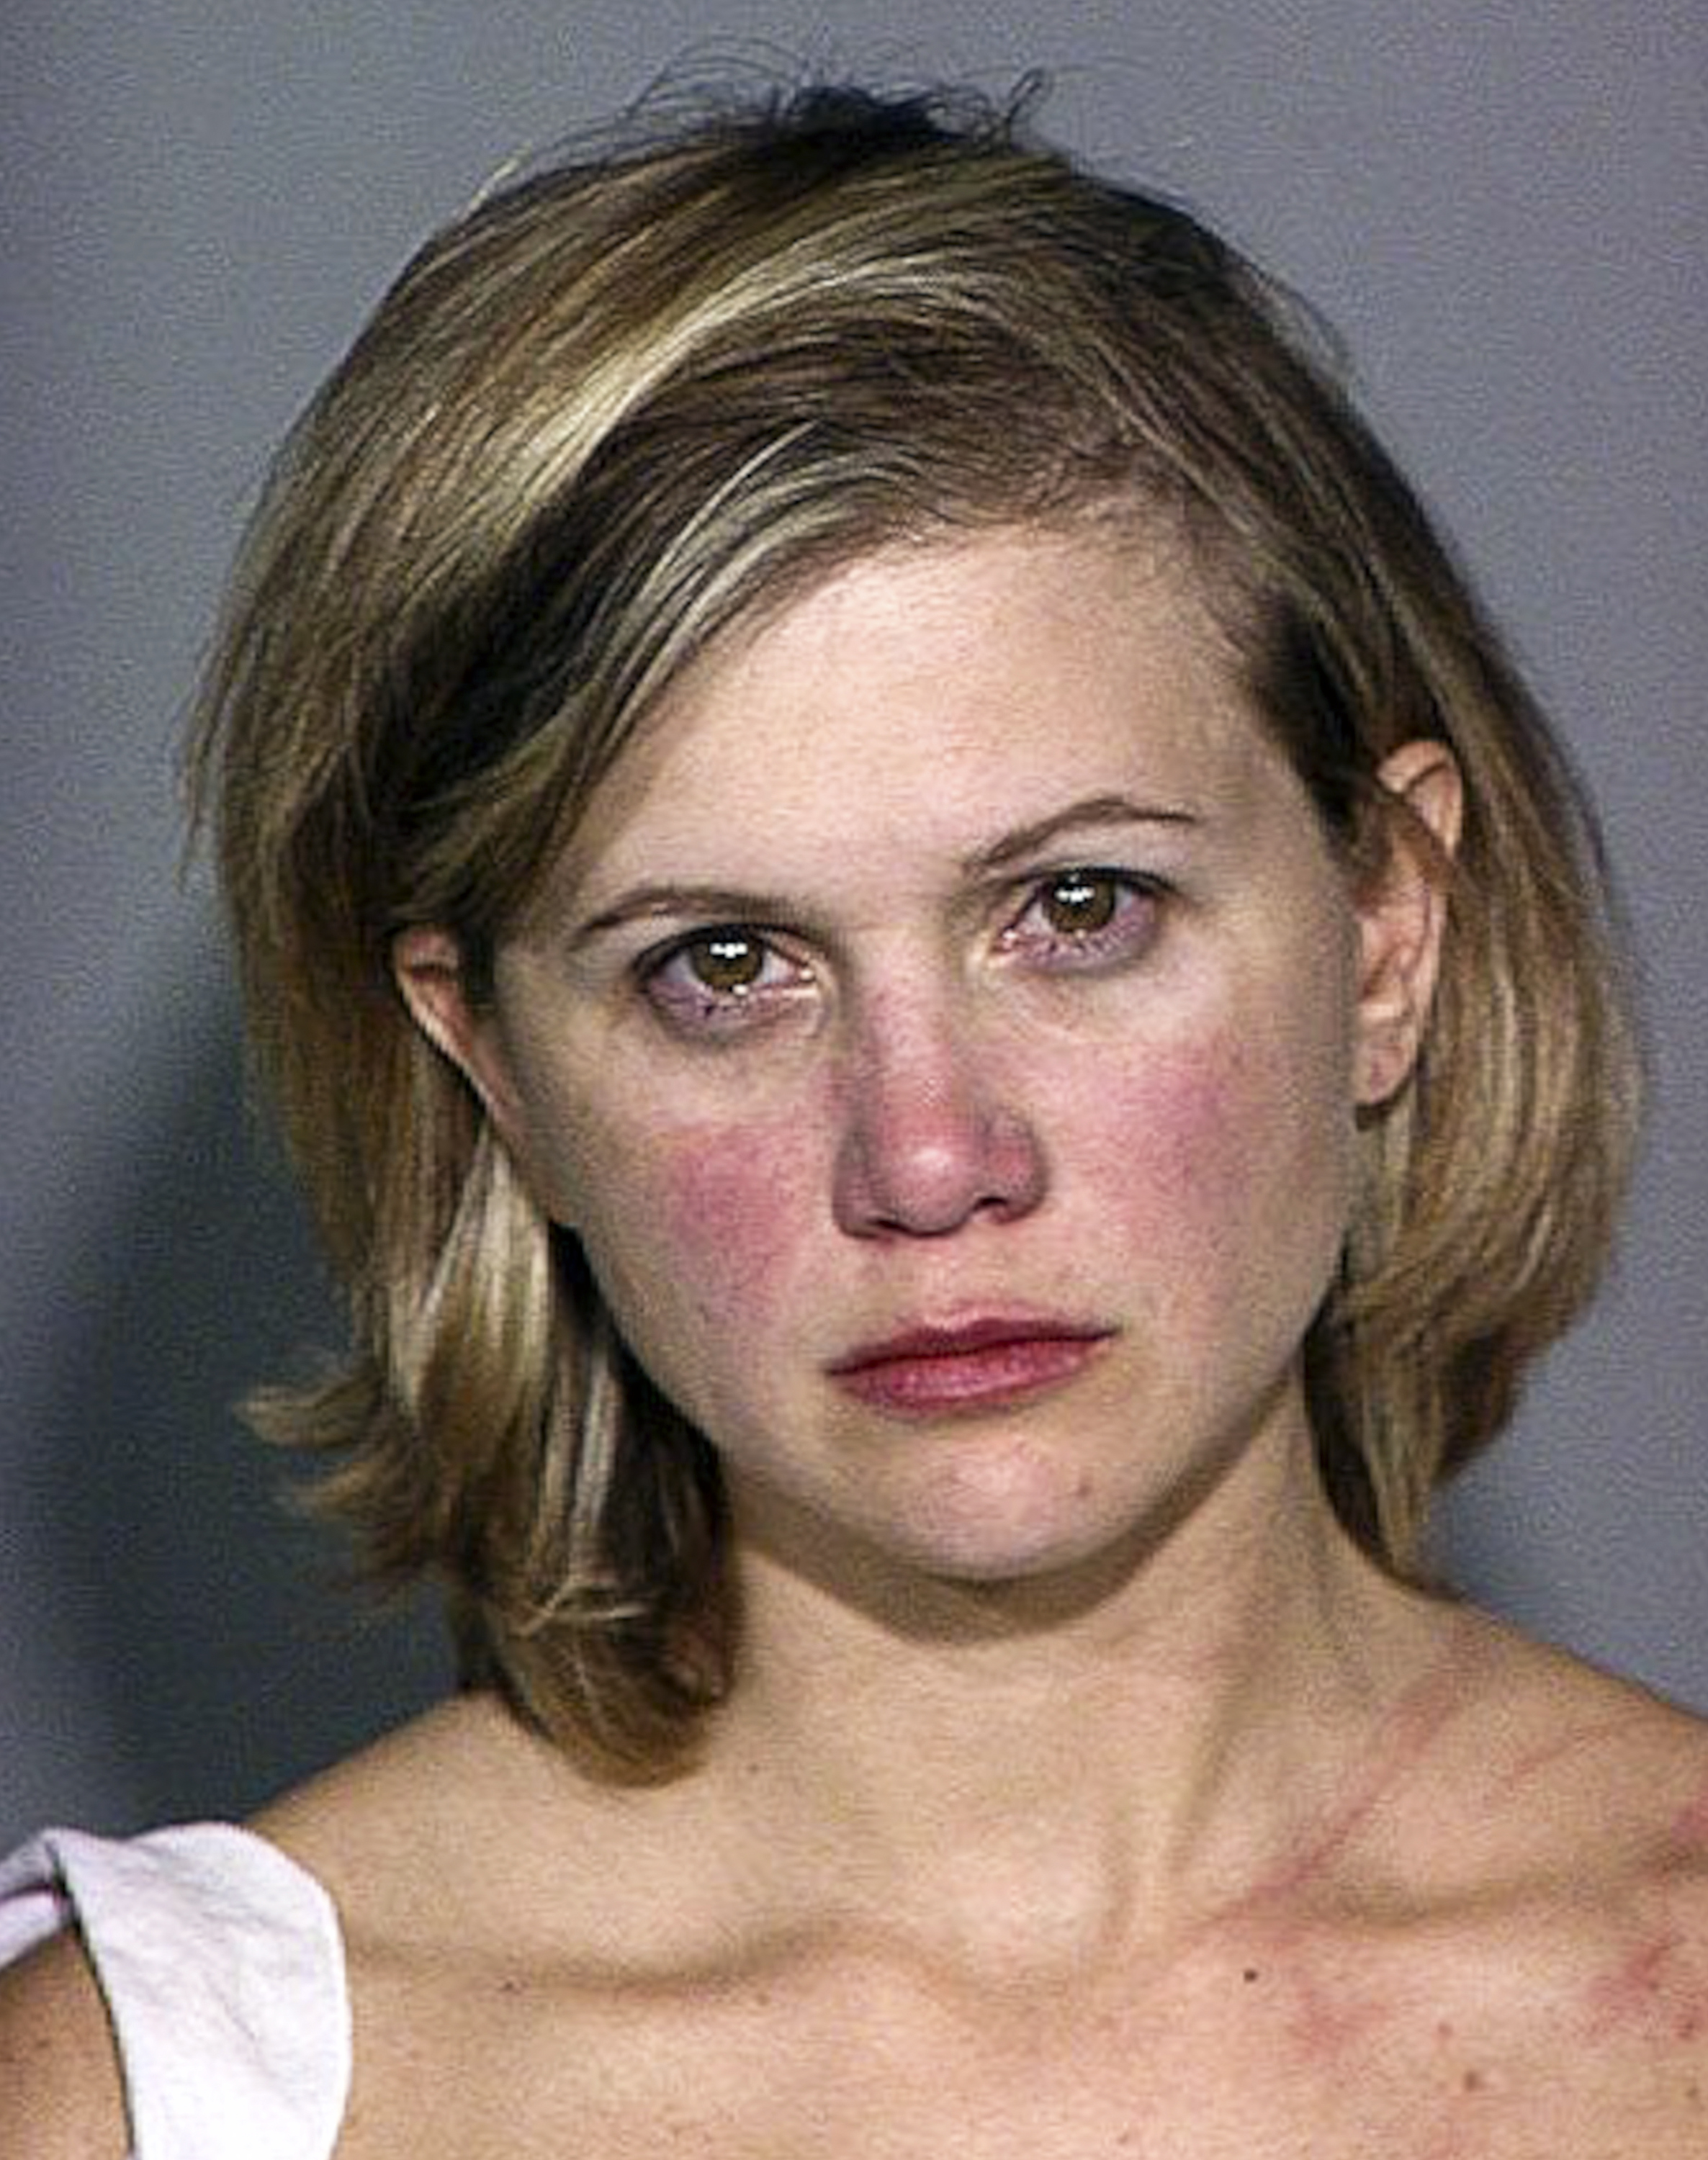 Tracey Gold in a mug shot following her arrest for driving under the influence on September 3, 2004, in Ventura, California. | Source: Getty Images